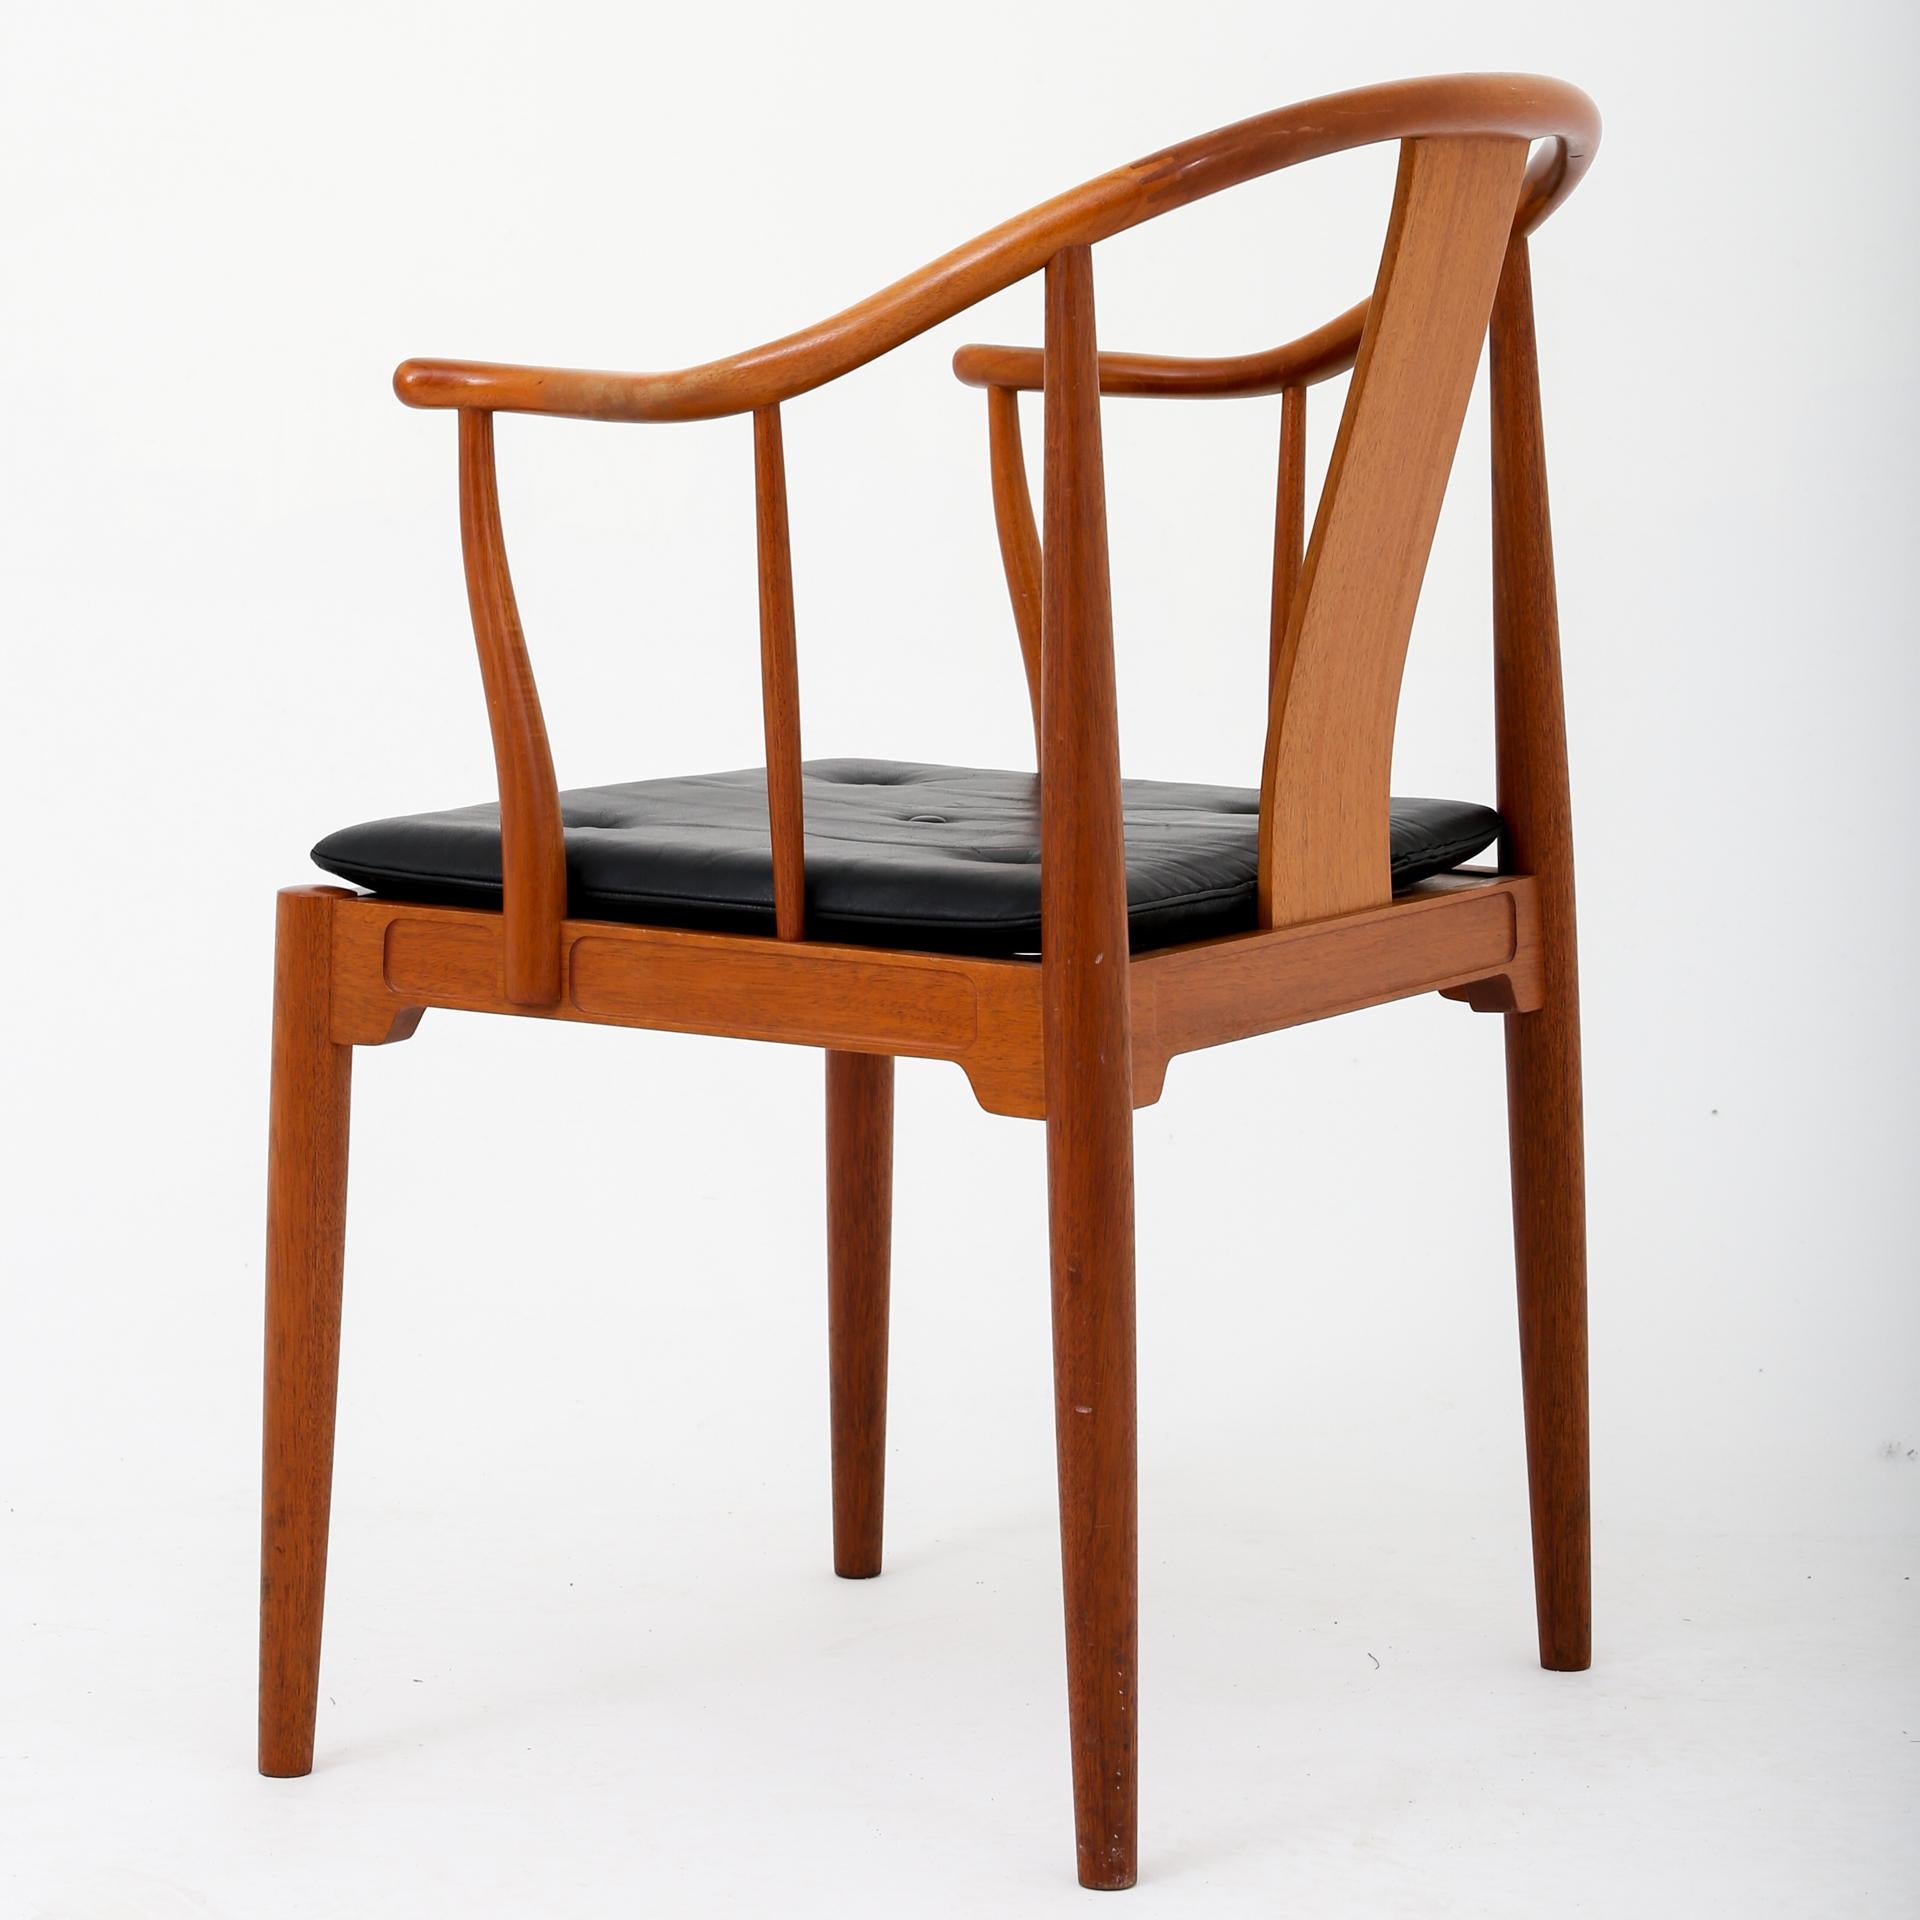 Hans J. Wegner / Fritz Hansen. FH 4283 - China chair in mahogany with cushion in black leather.